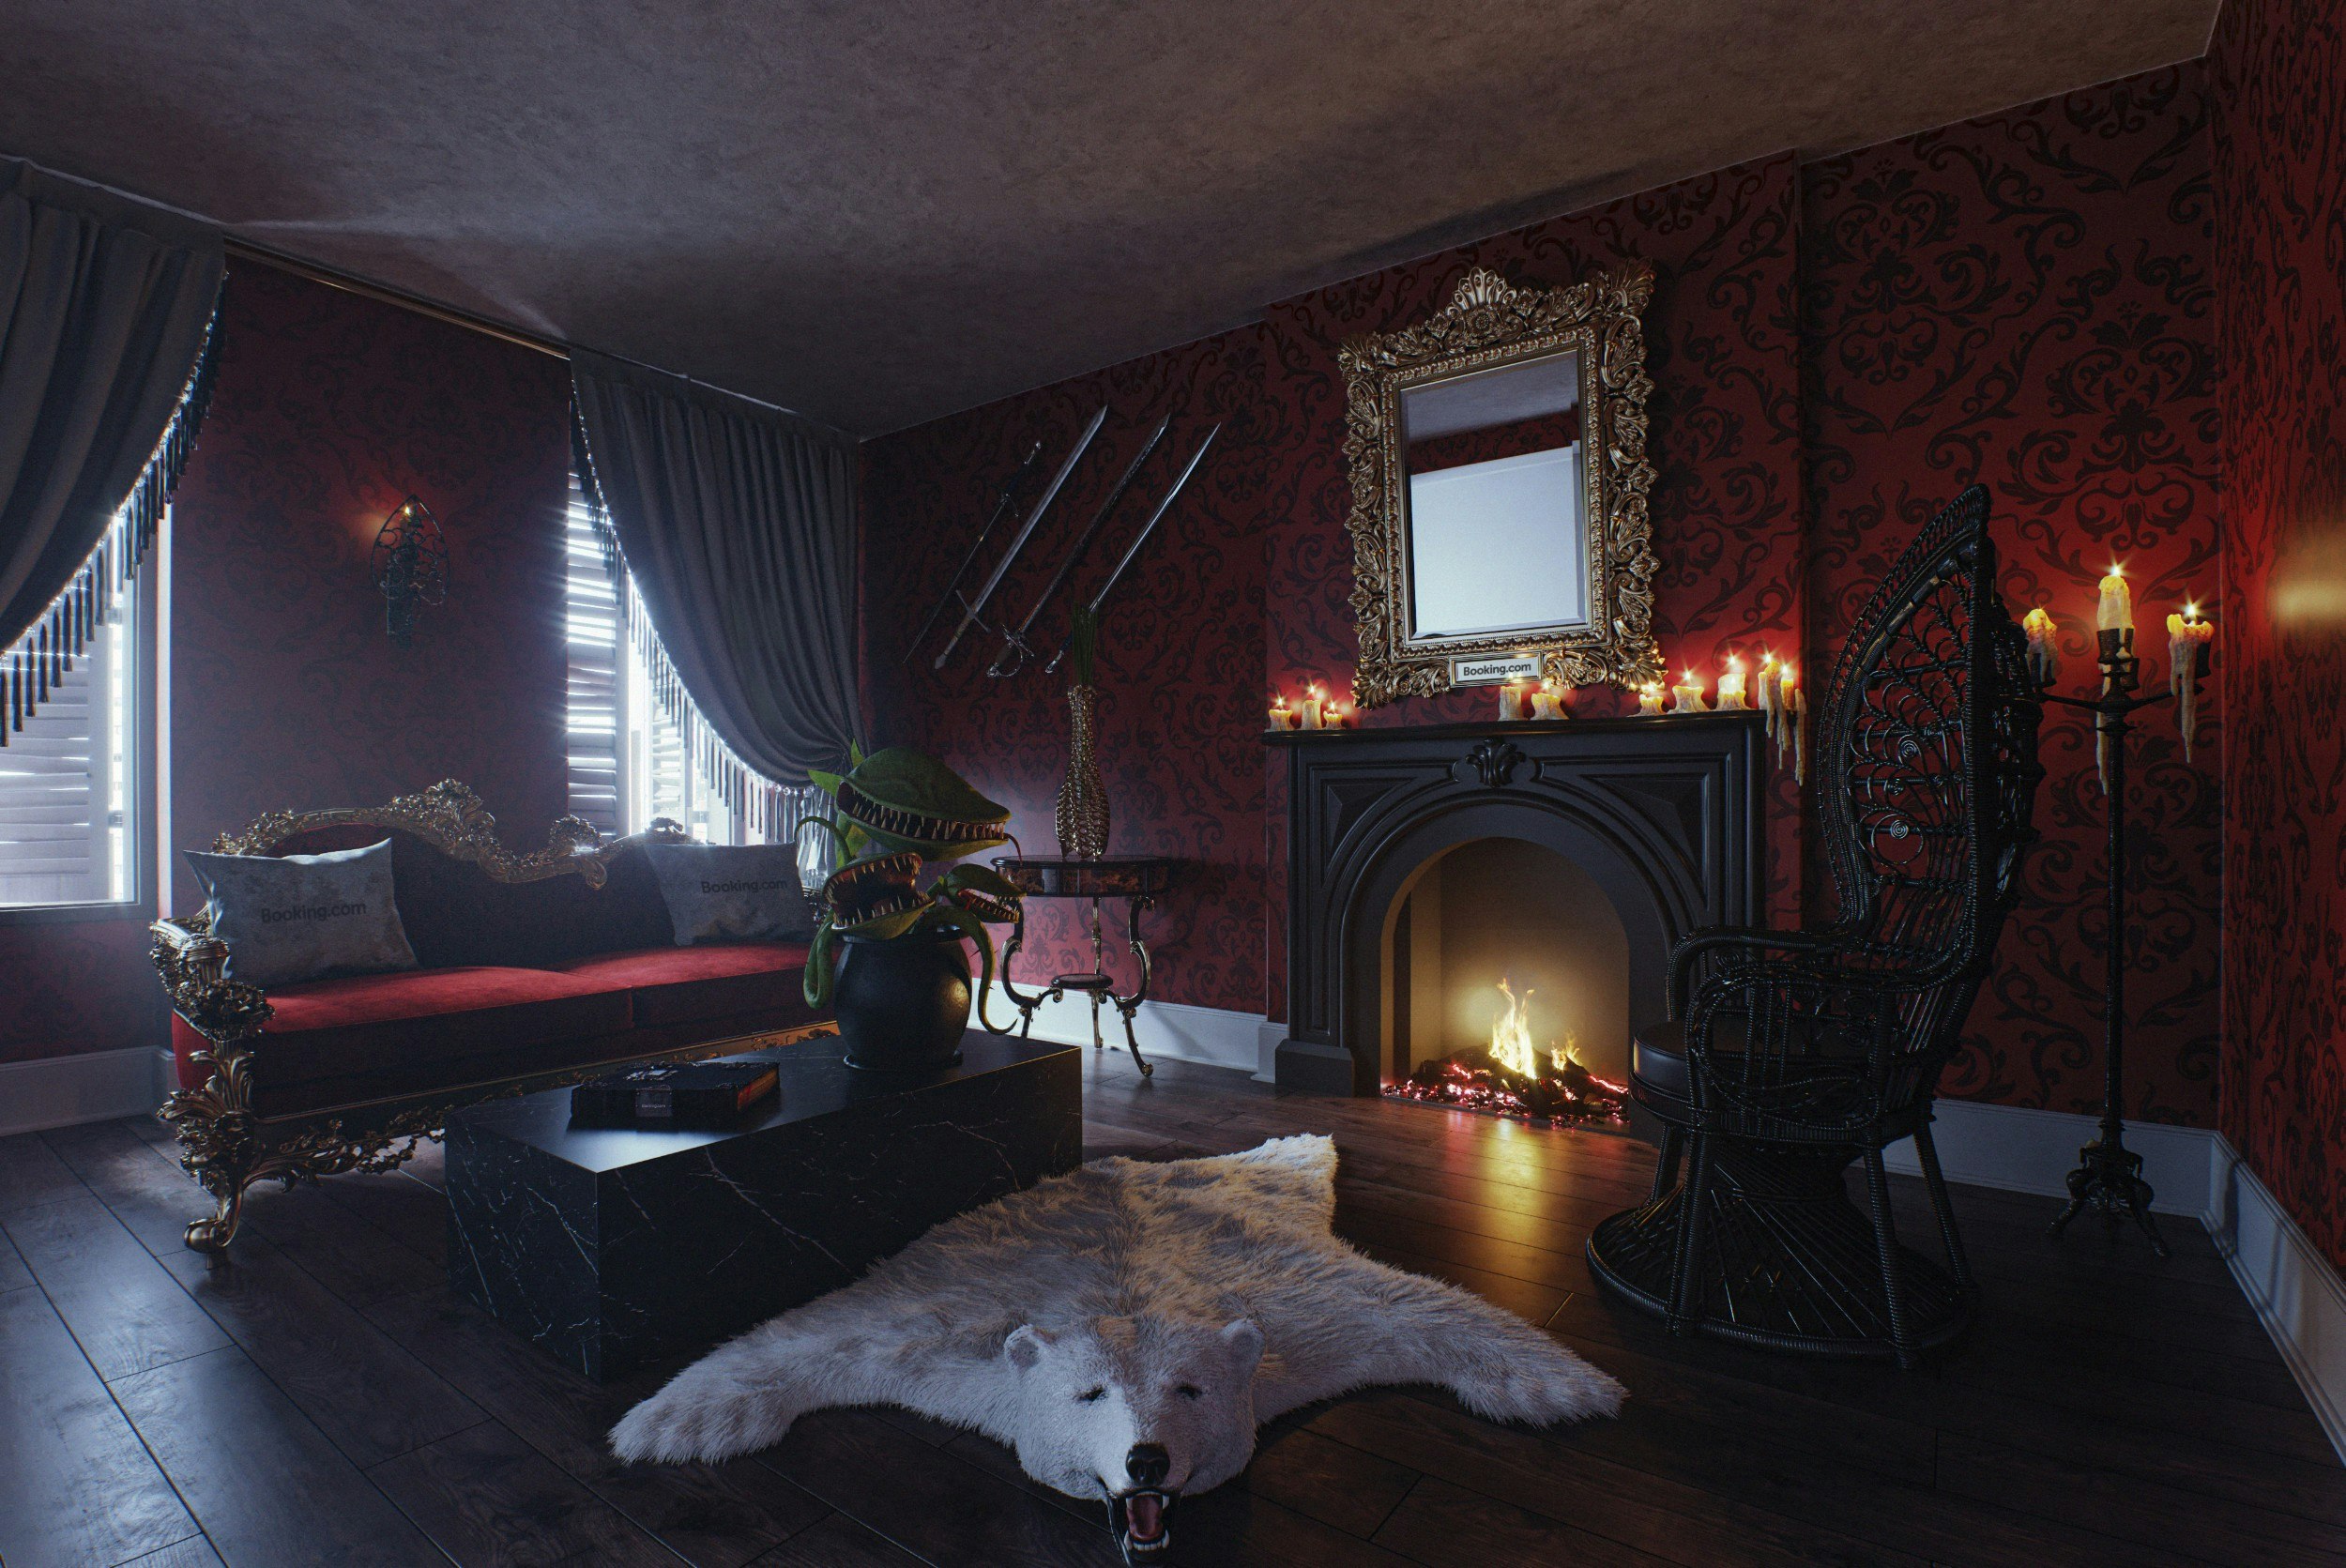 The macabre living room of the replica of the Addams Family mansion in Brooklyn